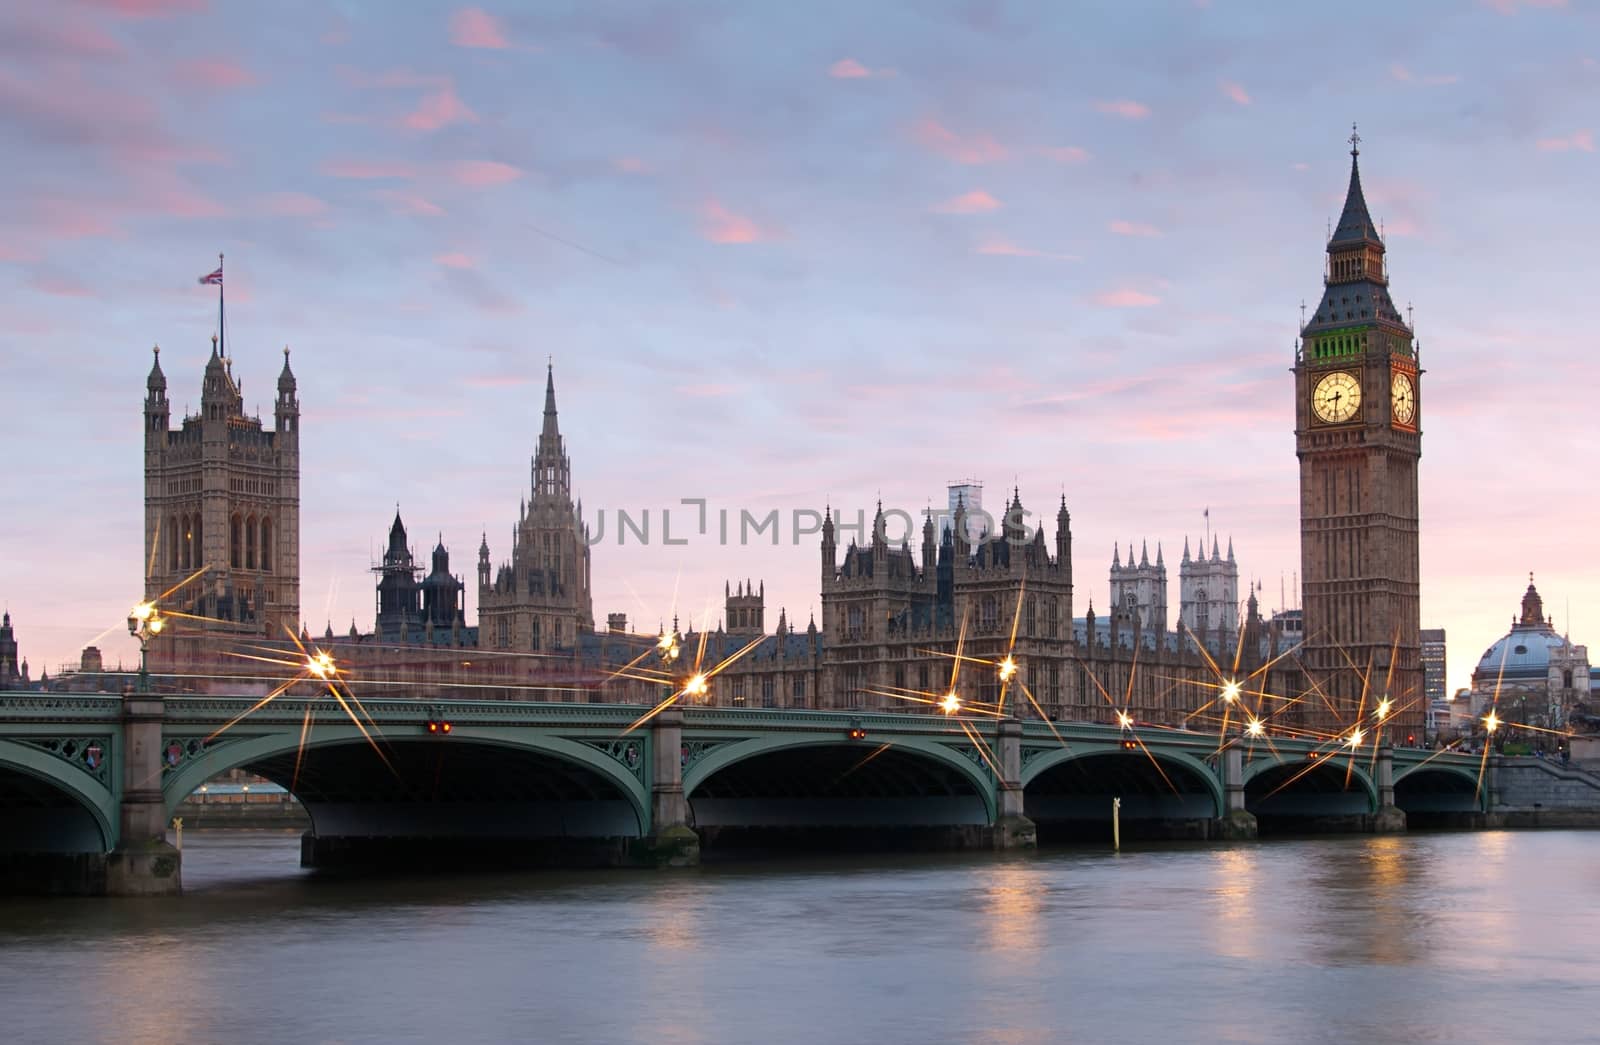 Big Ben, one of the most prominent symbols of both London and England, as shown at night along  by mitakag